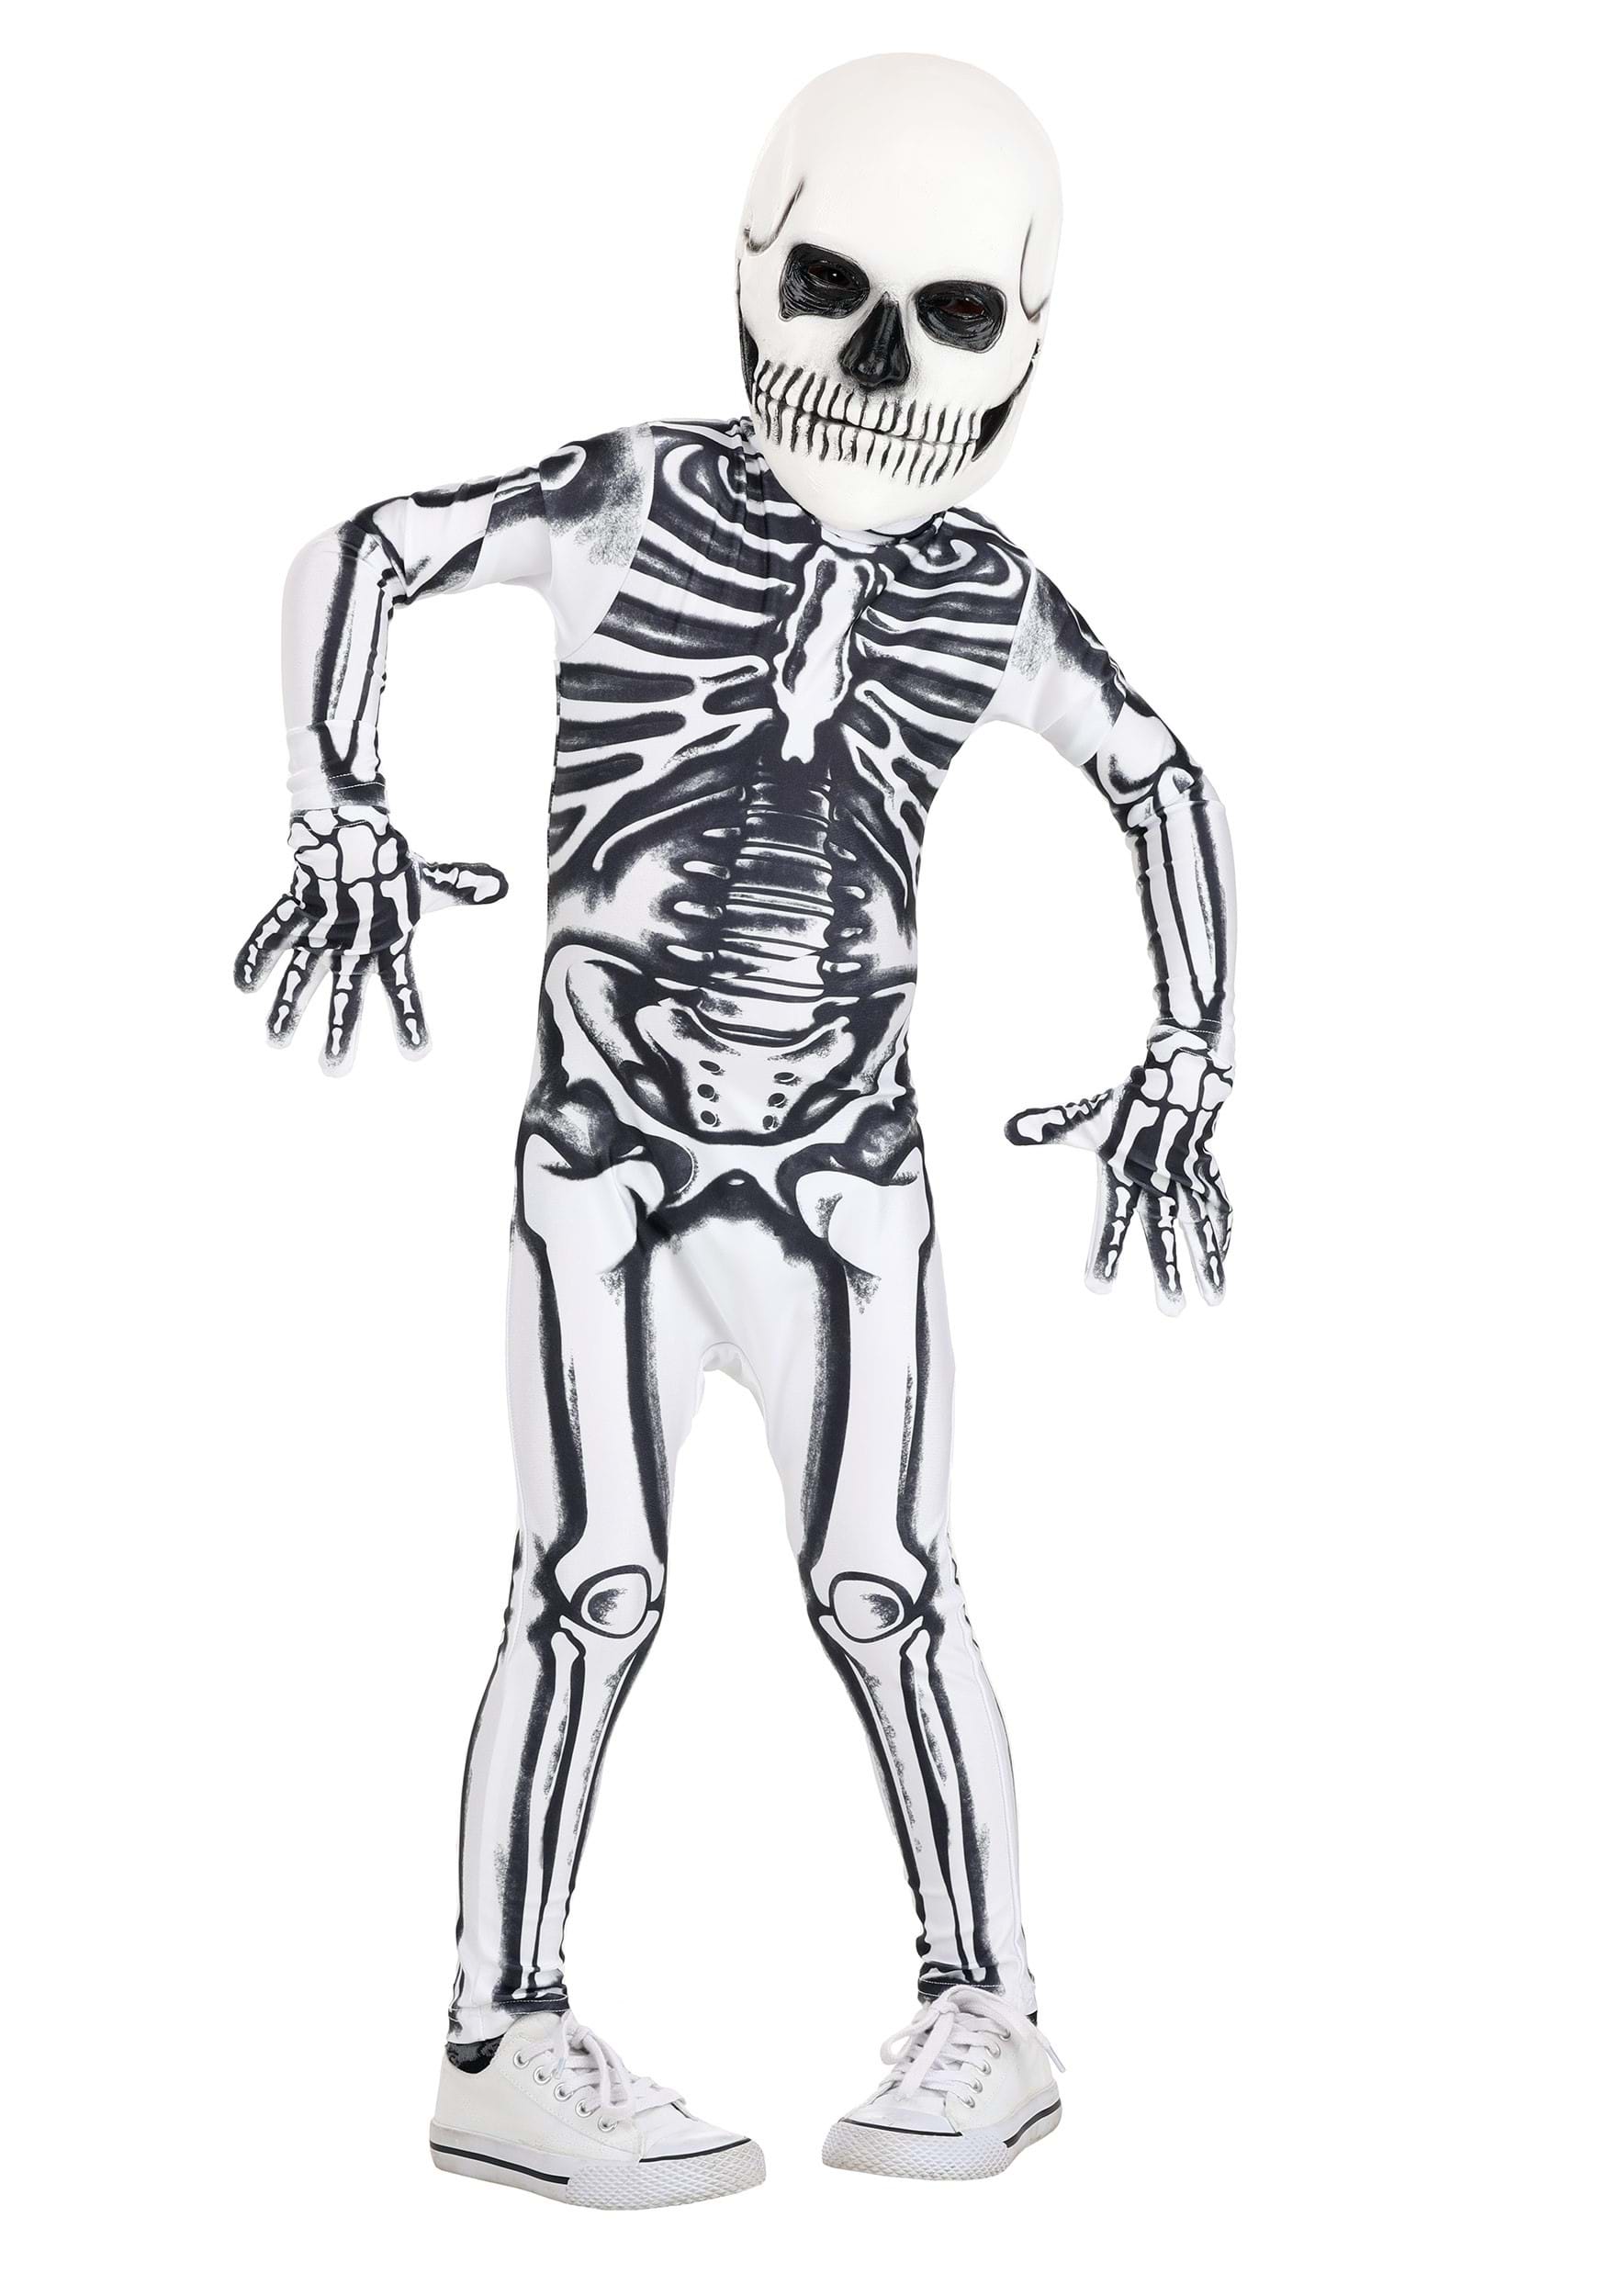 How to Draw a Skeleton - An Easy Cartoon Skeleton Drawing